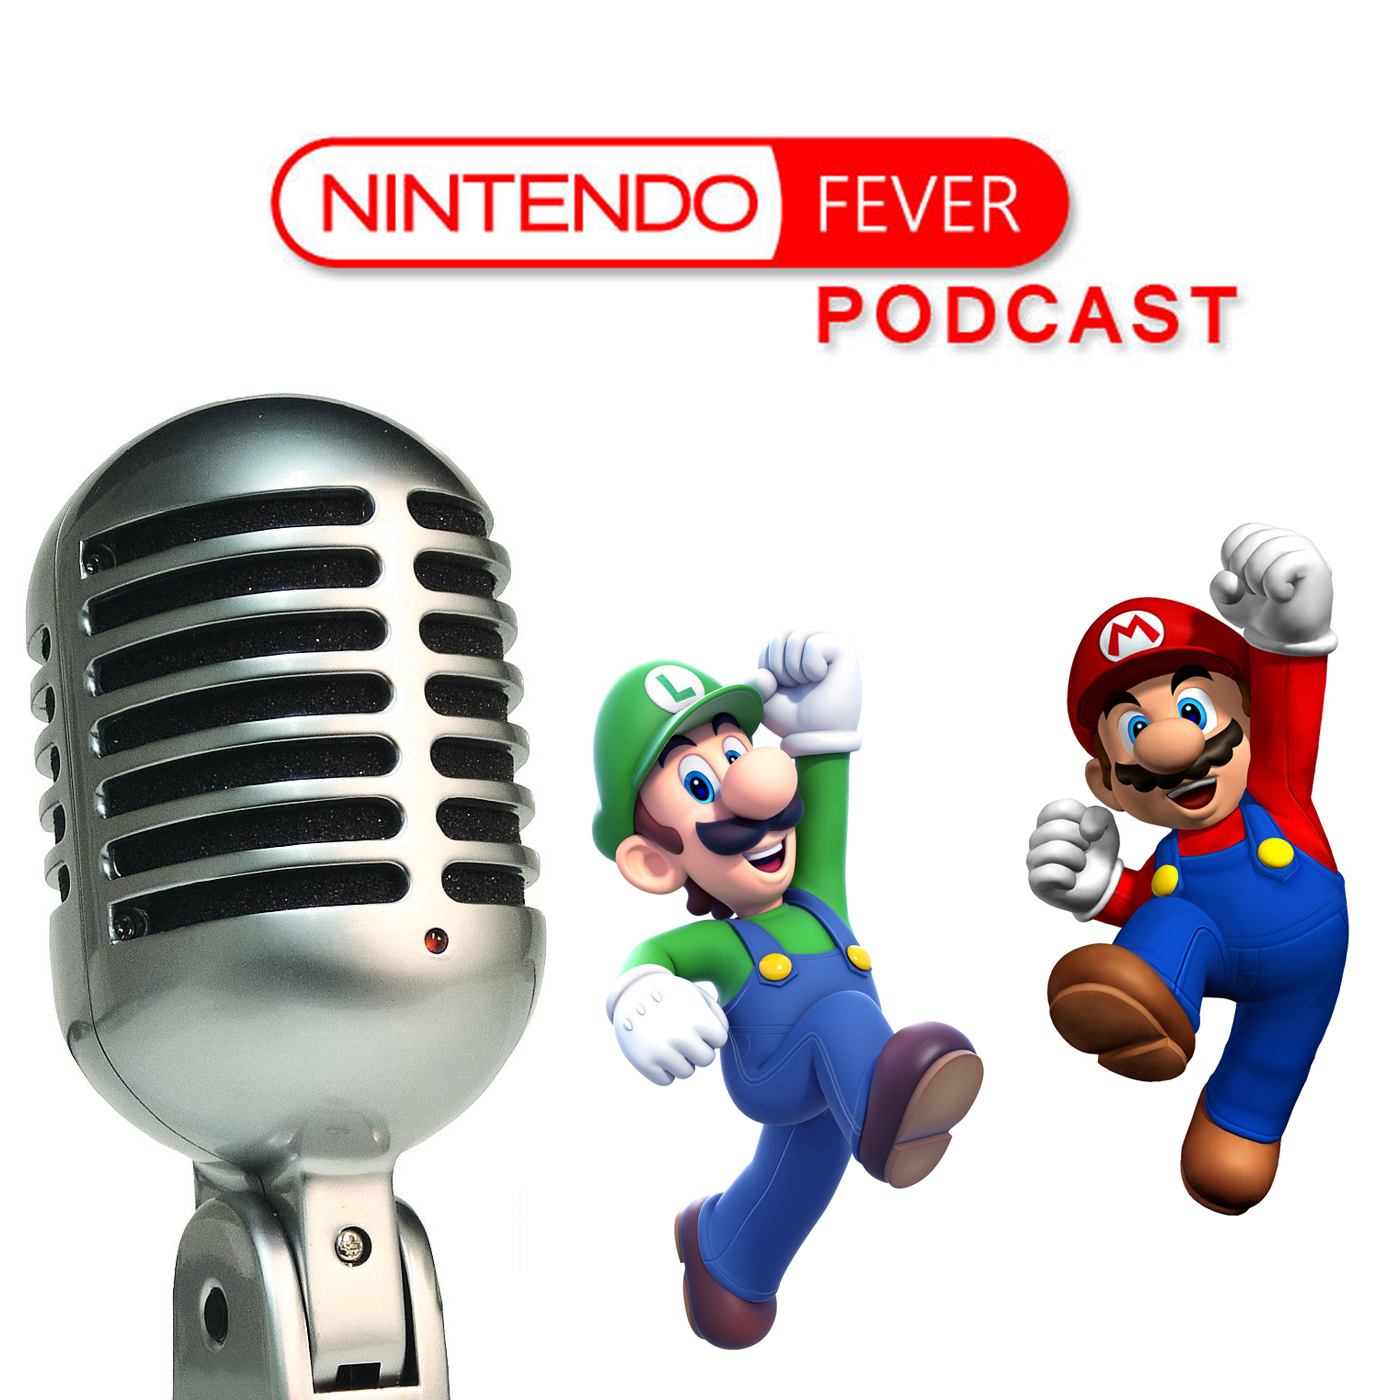 NintendoFever Podcast Episode 103: Games We Love to Hate